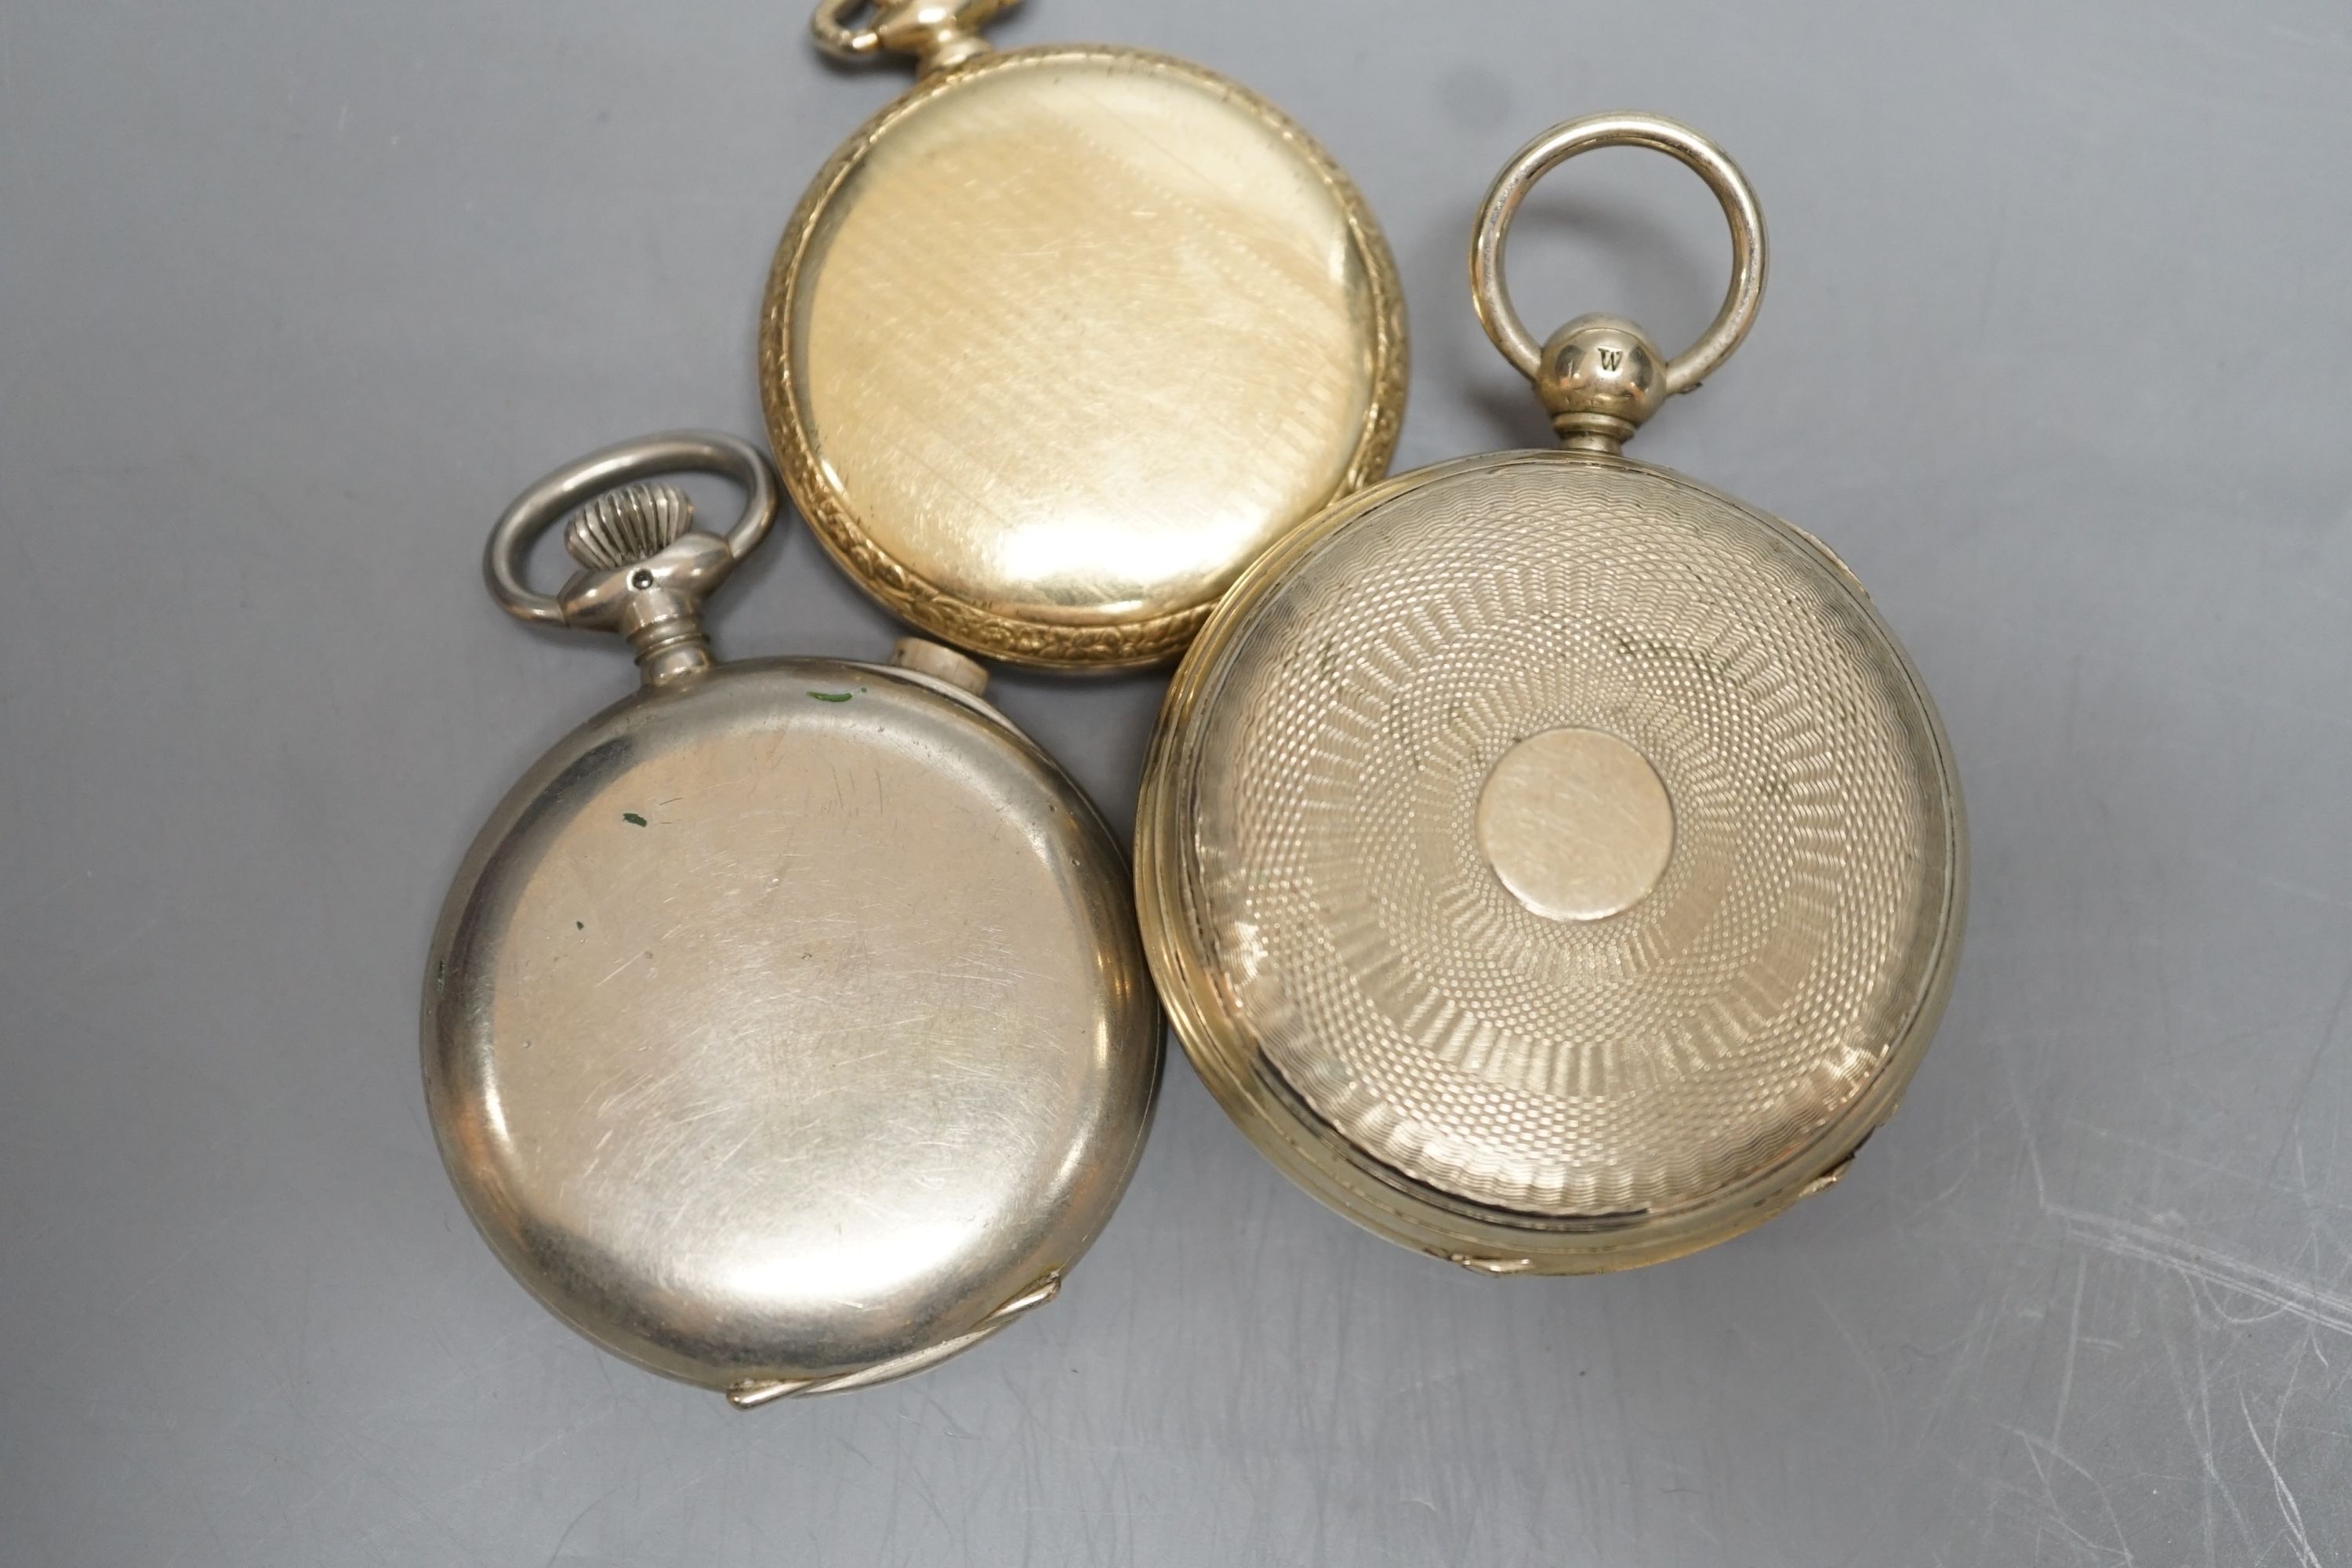 Three base metal pocket watches including 19th century pair case by Robert Weir, Dunbar(lacking hands).